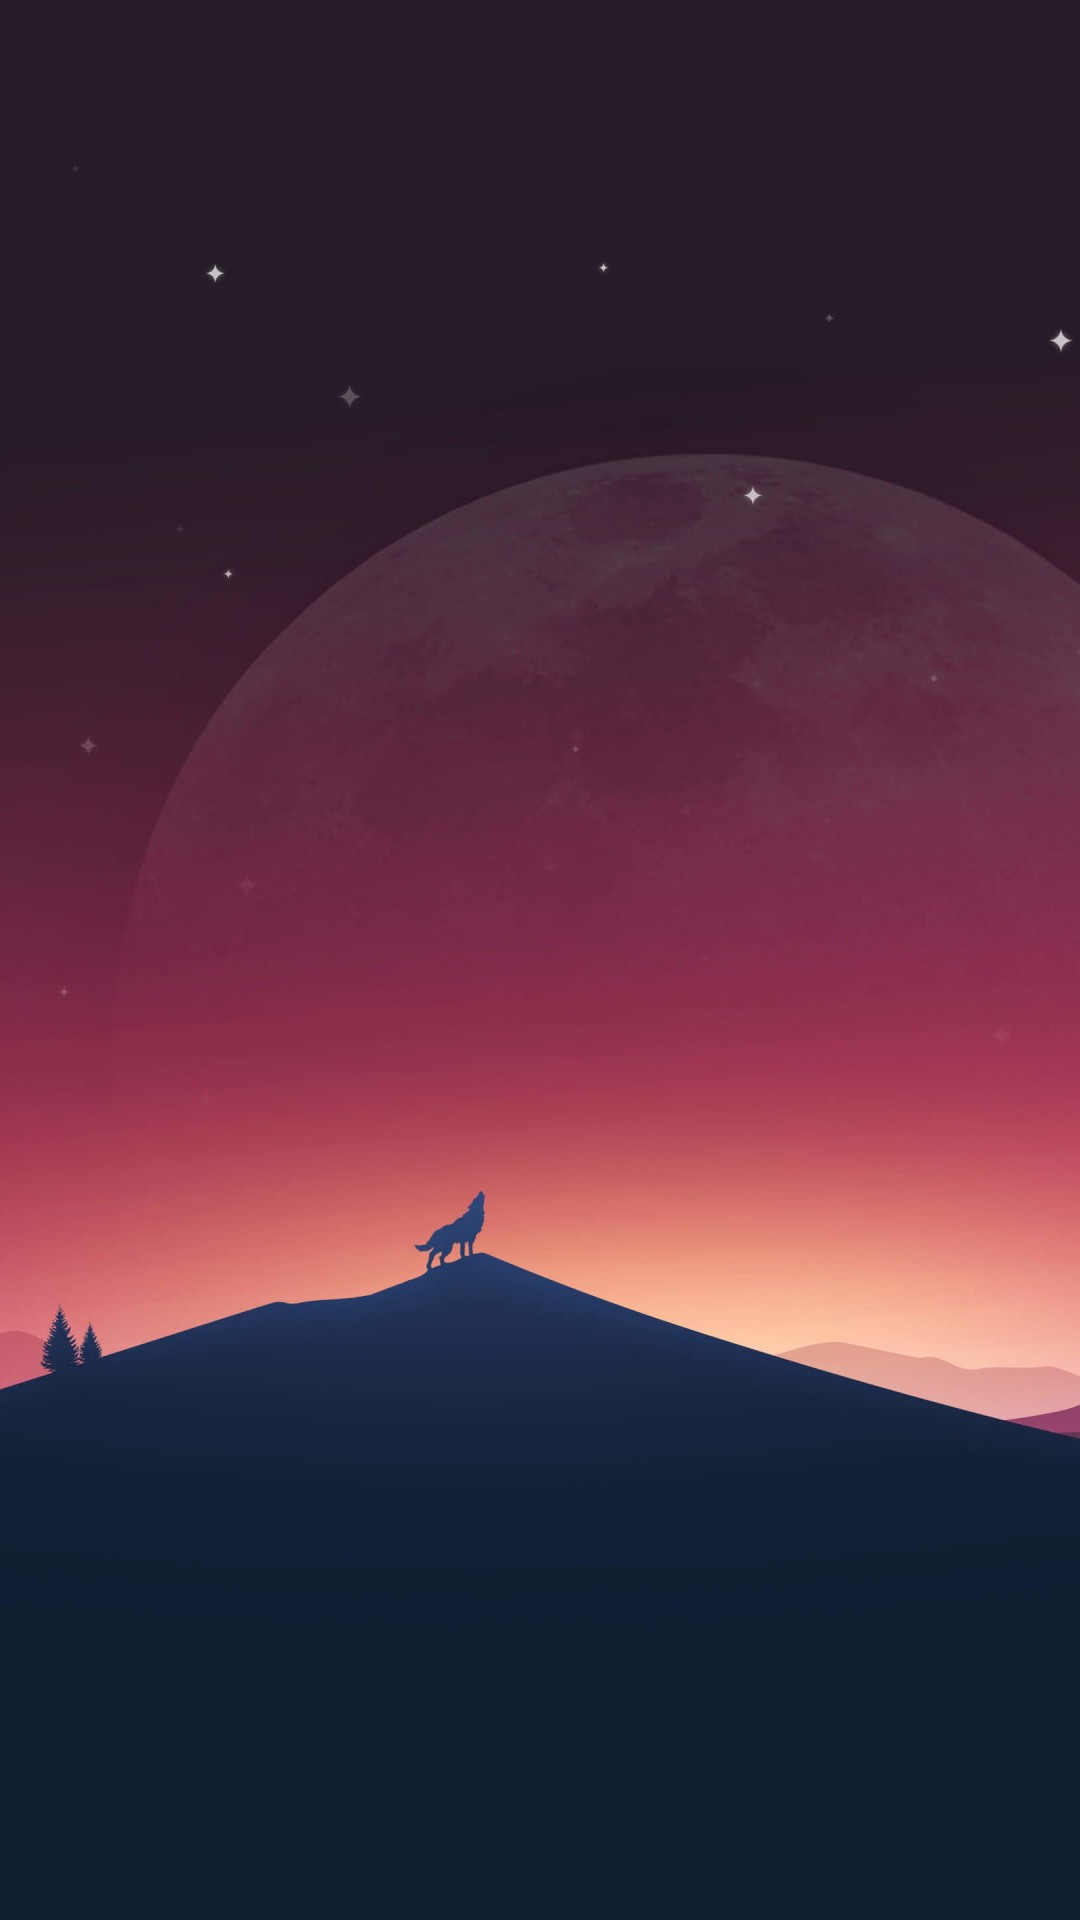 Wolf Howling At The Moon Wallpaper for Google Nexus 5